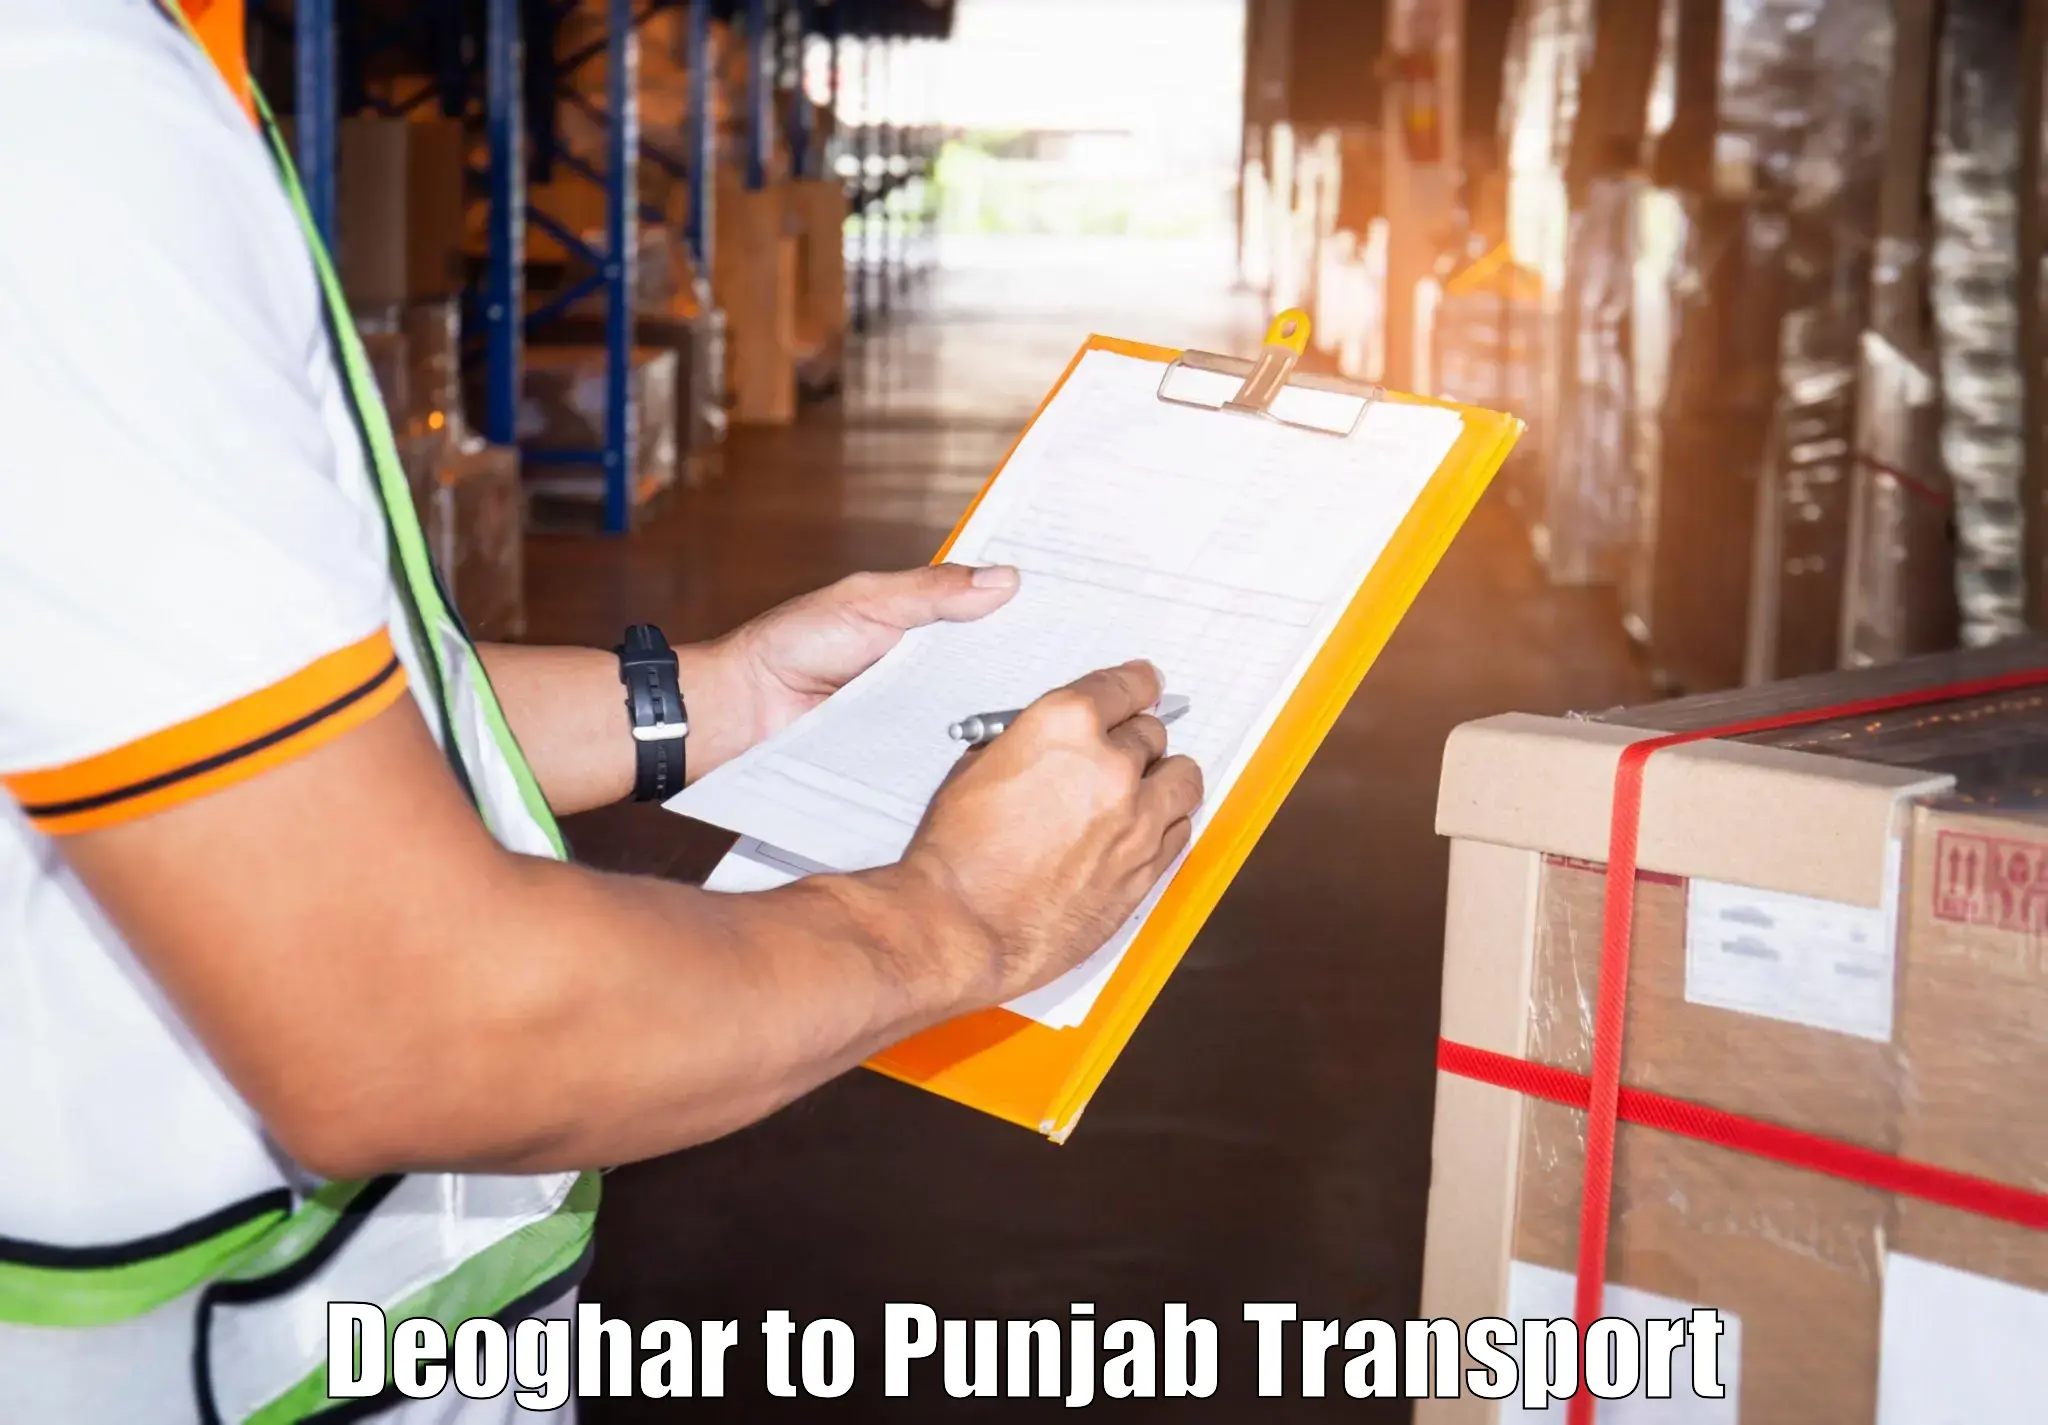 Best transport services in India Deoghar to Dinanagar